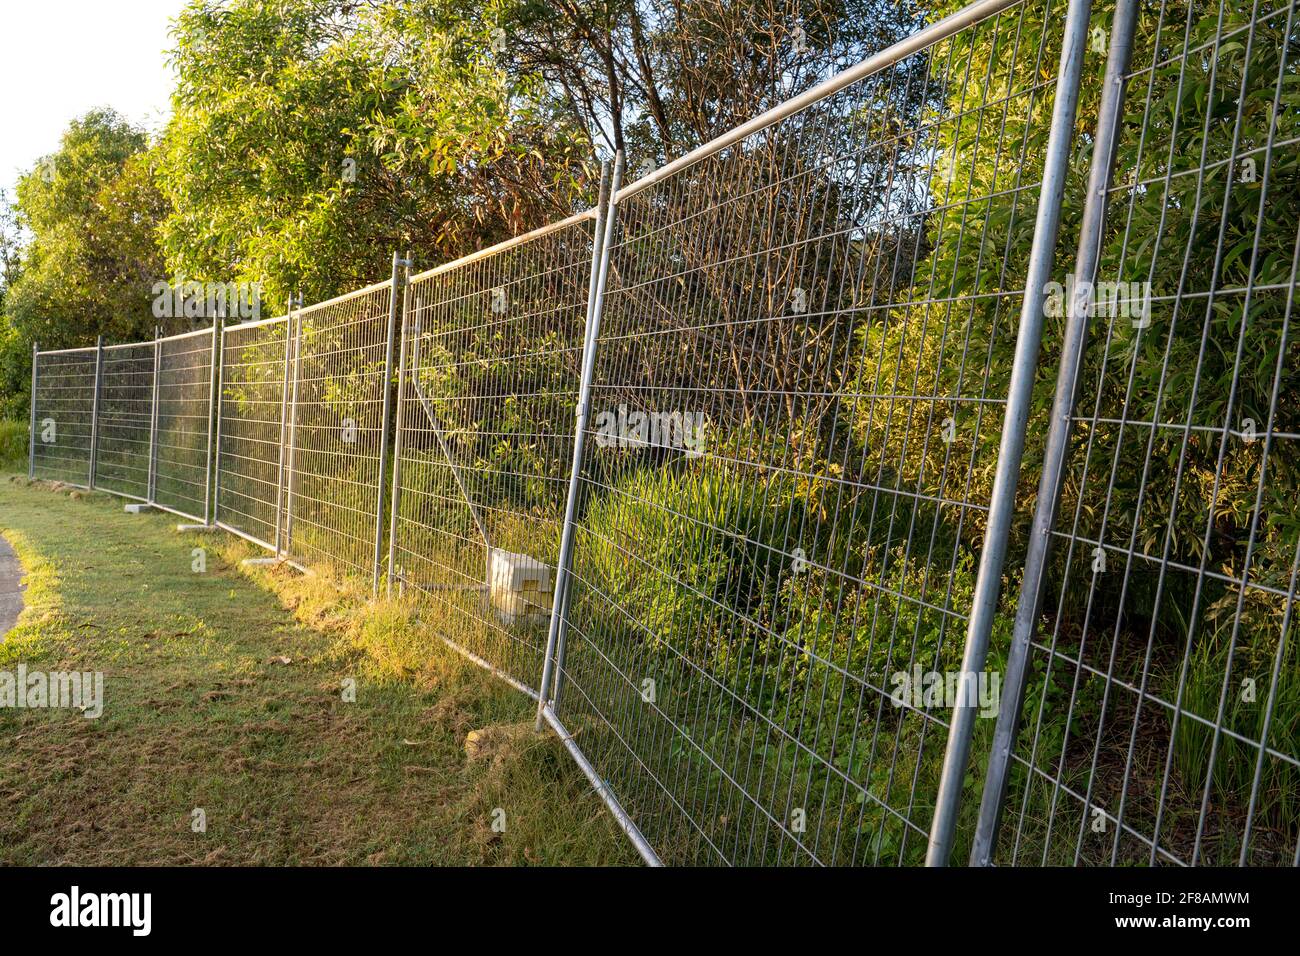 Temporary fencing installed prior to work being carried out Stock Photo